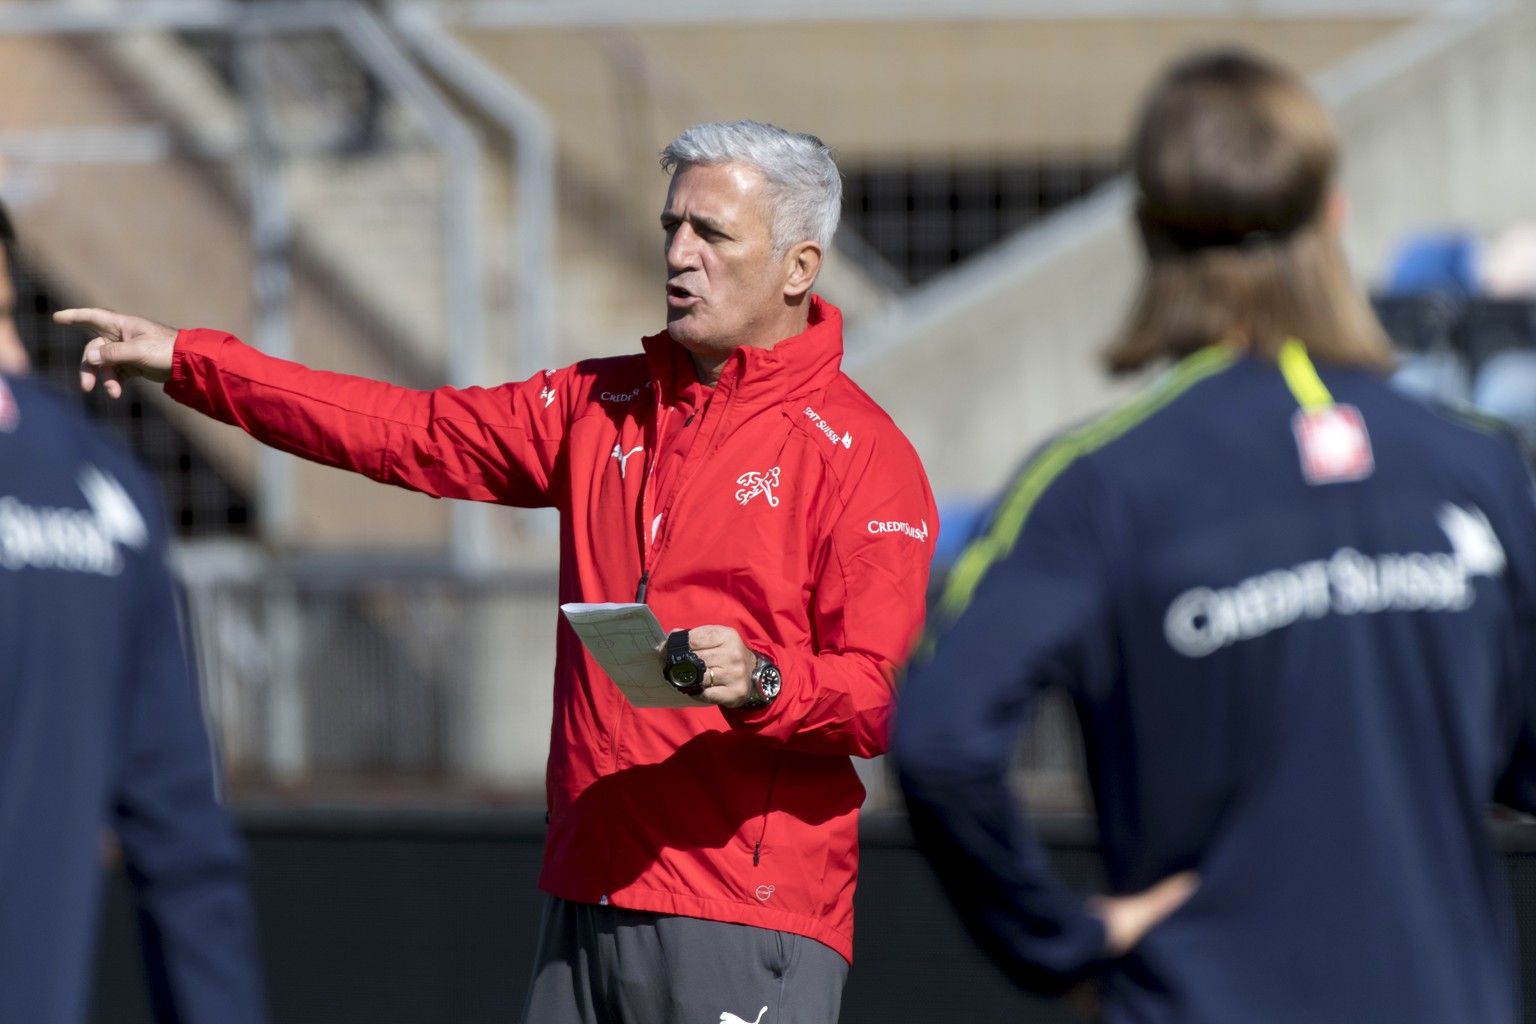 Switzerland&#039;s national soccer team head coach Vladimir Petkovic gestures during a training session before the upcoming UEFA Euro 2020 qualifying soccer matchs, at the Stade Olympique de la Pontai ...